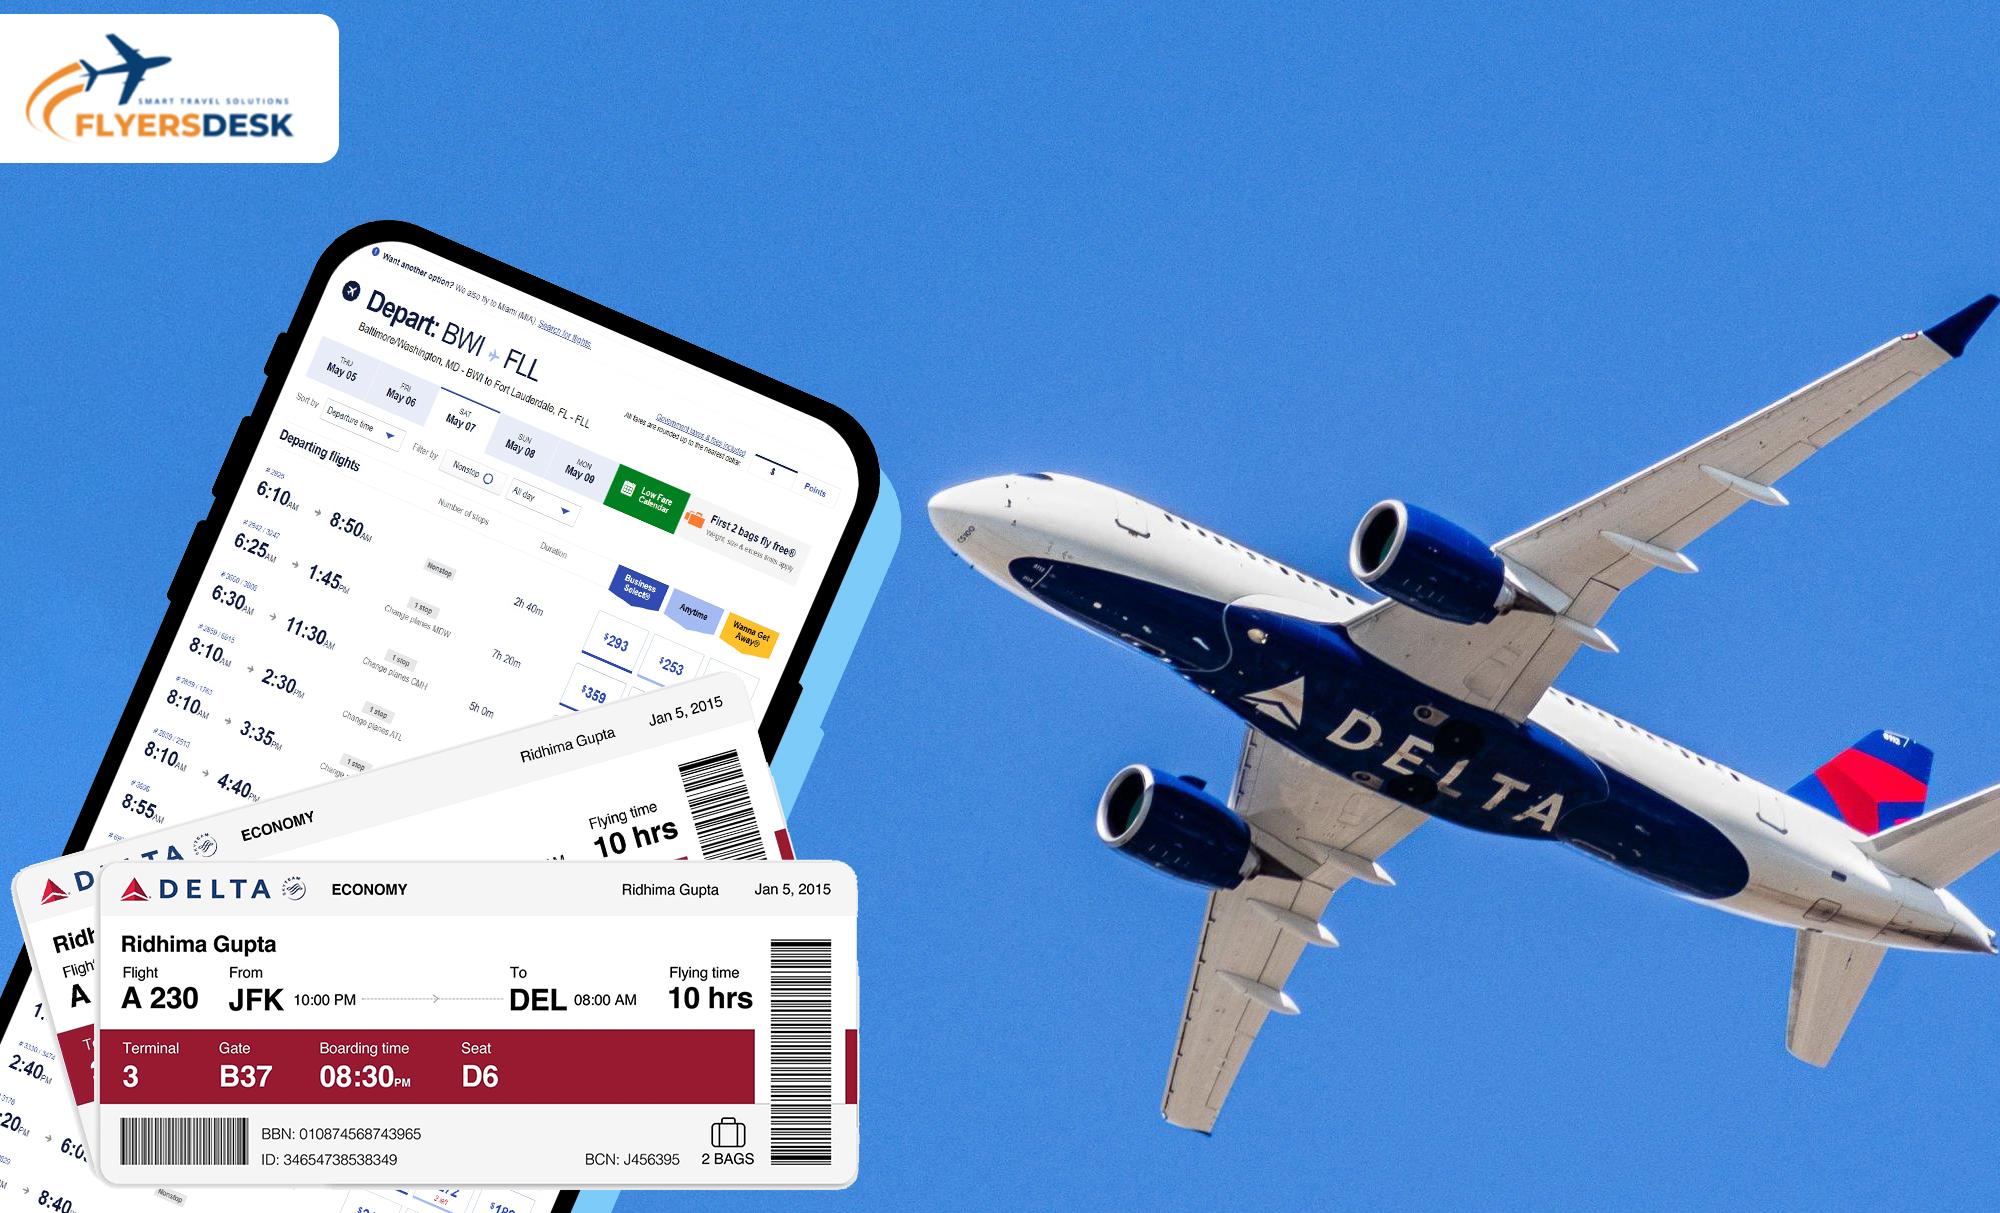 How to Access The Delta Low Fare Calendar